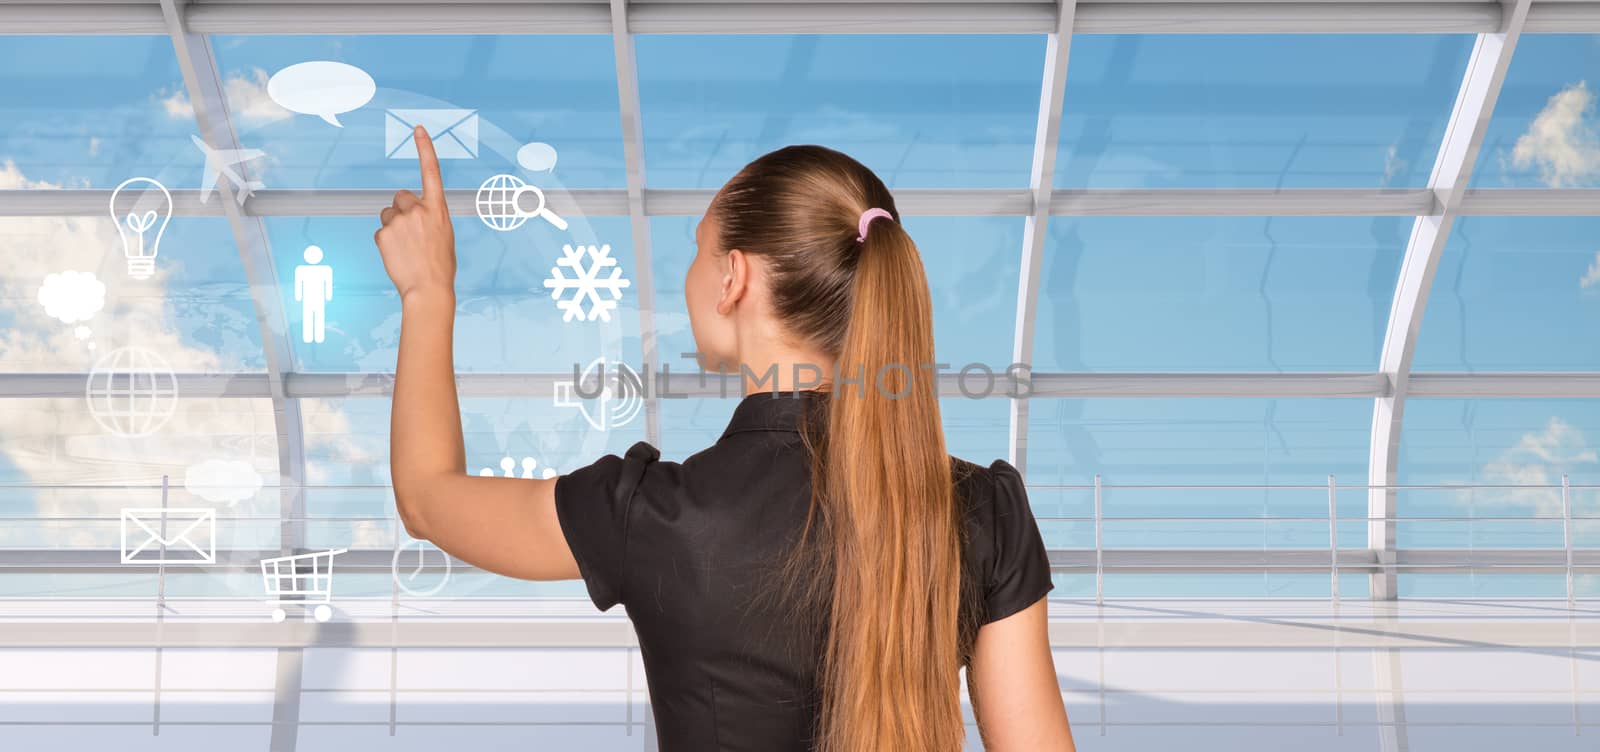 Rear view of businesswoman in dress pressing on holographic screen with icons